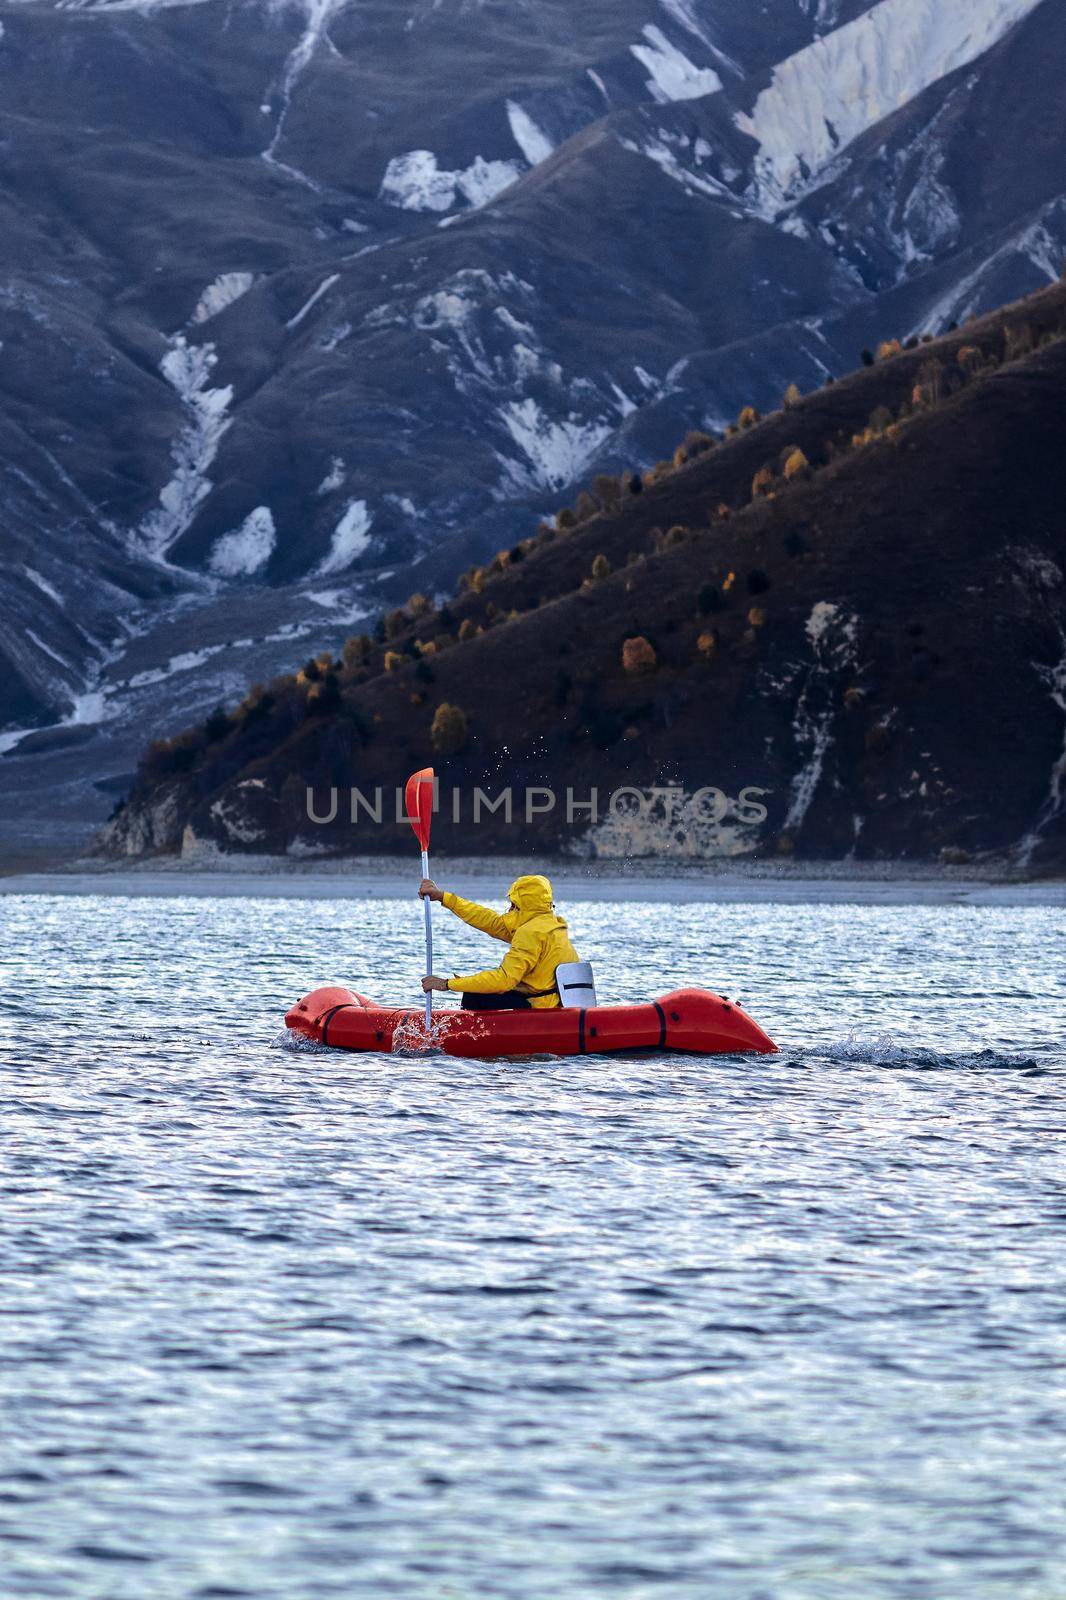 Swim in Packraft. Packraft, one-person light raft used for expedition or adventure racing, on a lake, inflatable boat Ride on a mountain lake.